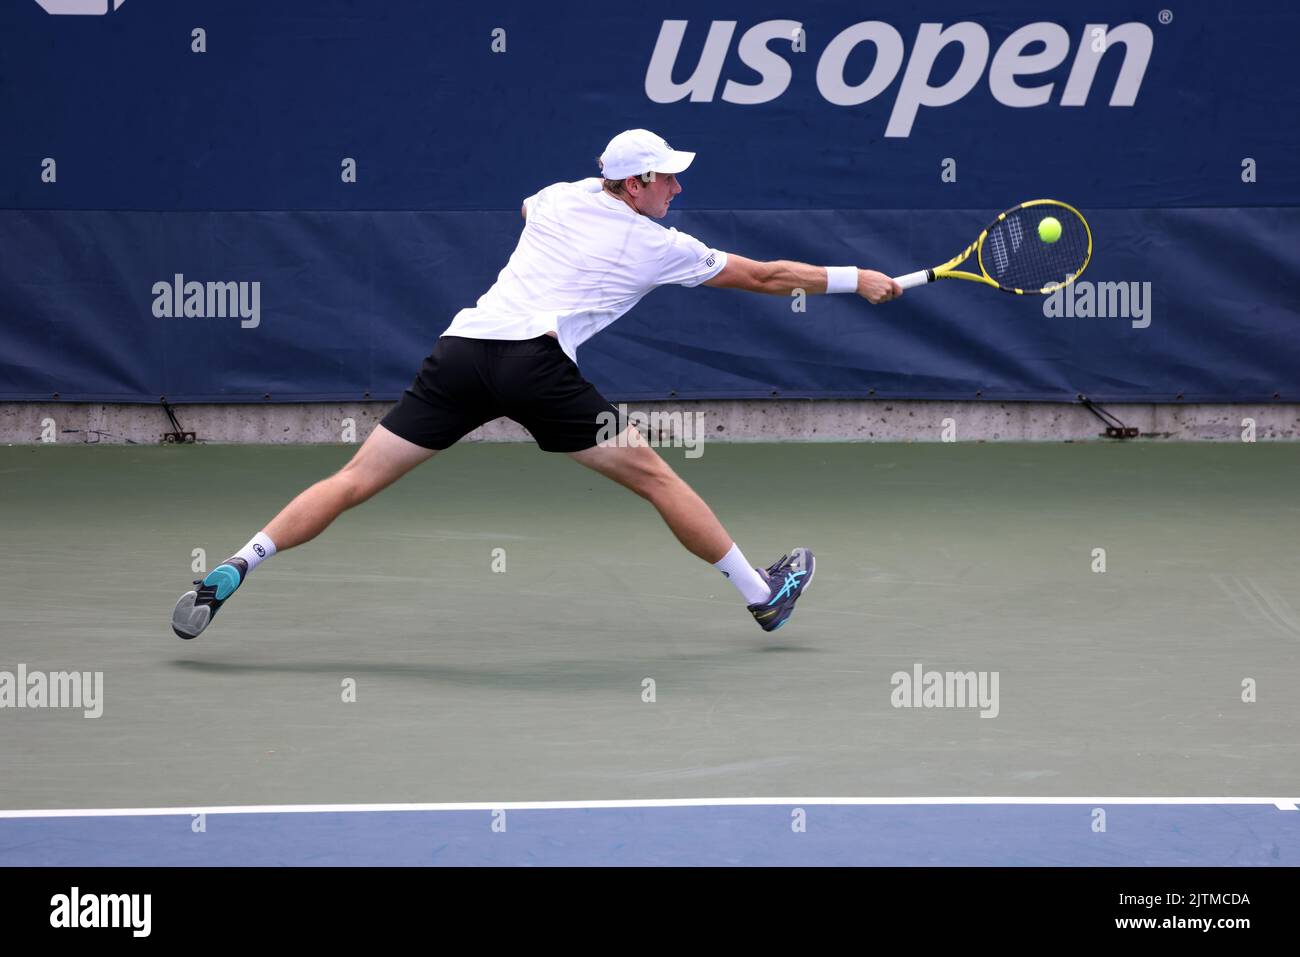 NEW YORK, NY - AUGUST 31: Botic van de Zandschulp of the Netherlands during his match against Corentin Moutet of France at USTA Billie Jean King National Tennis Center on August 30, 2022 in New York City. (Photo by Adam Stoltman/BSR Agency) Stock Photo